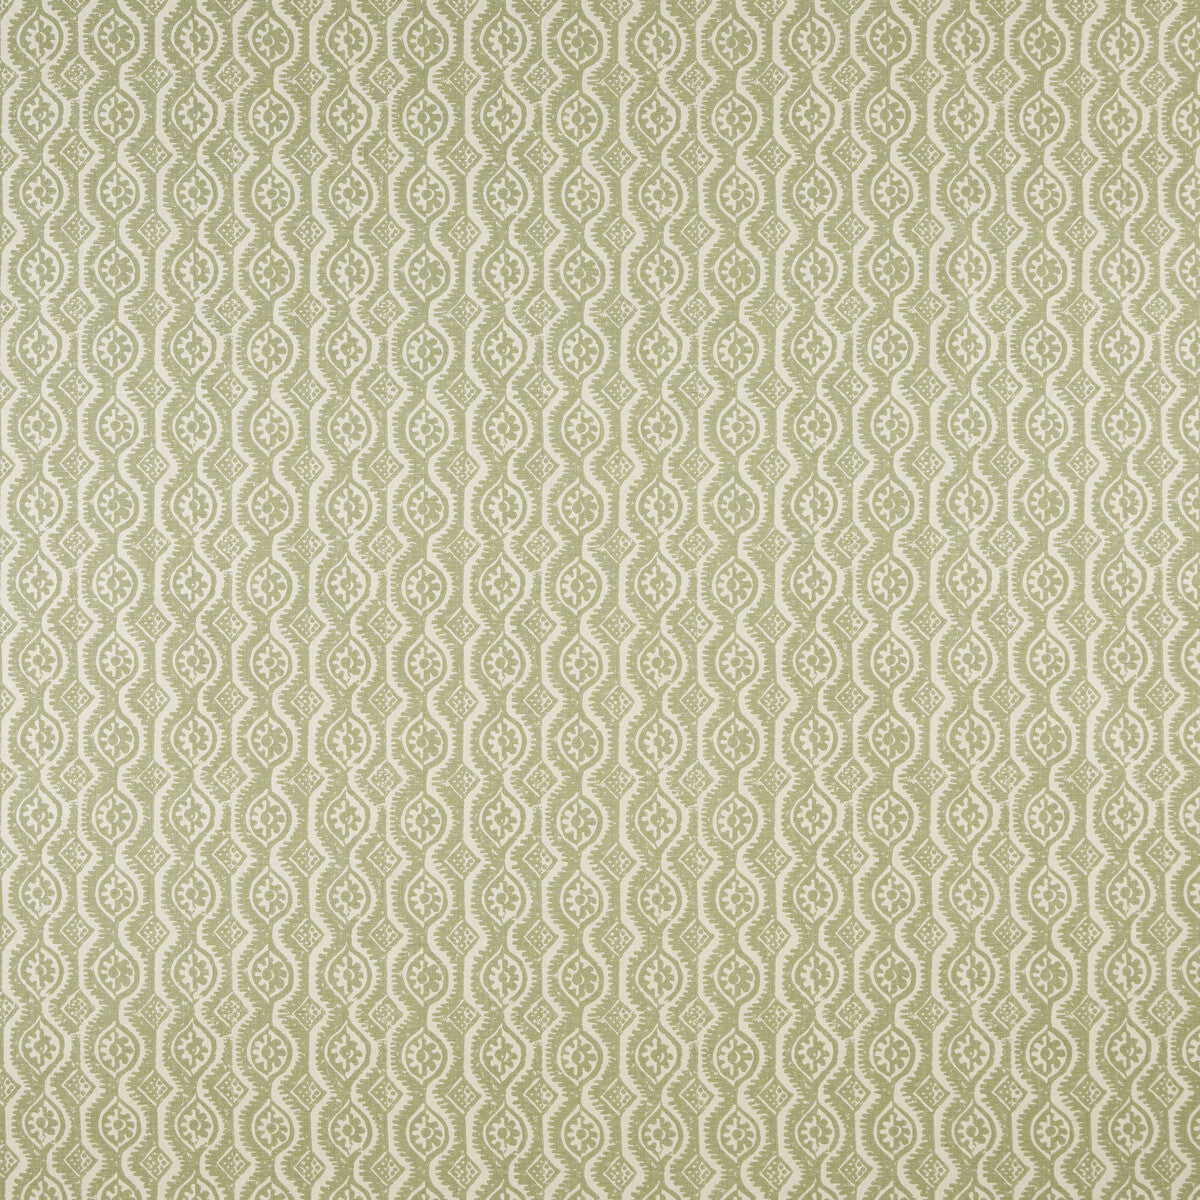 Small Damask fabric in green color - pattern BFC-3642.3.0 - by Lee Jofa in the Blithfield collection